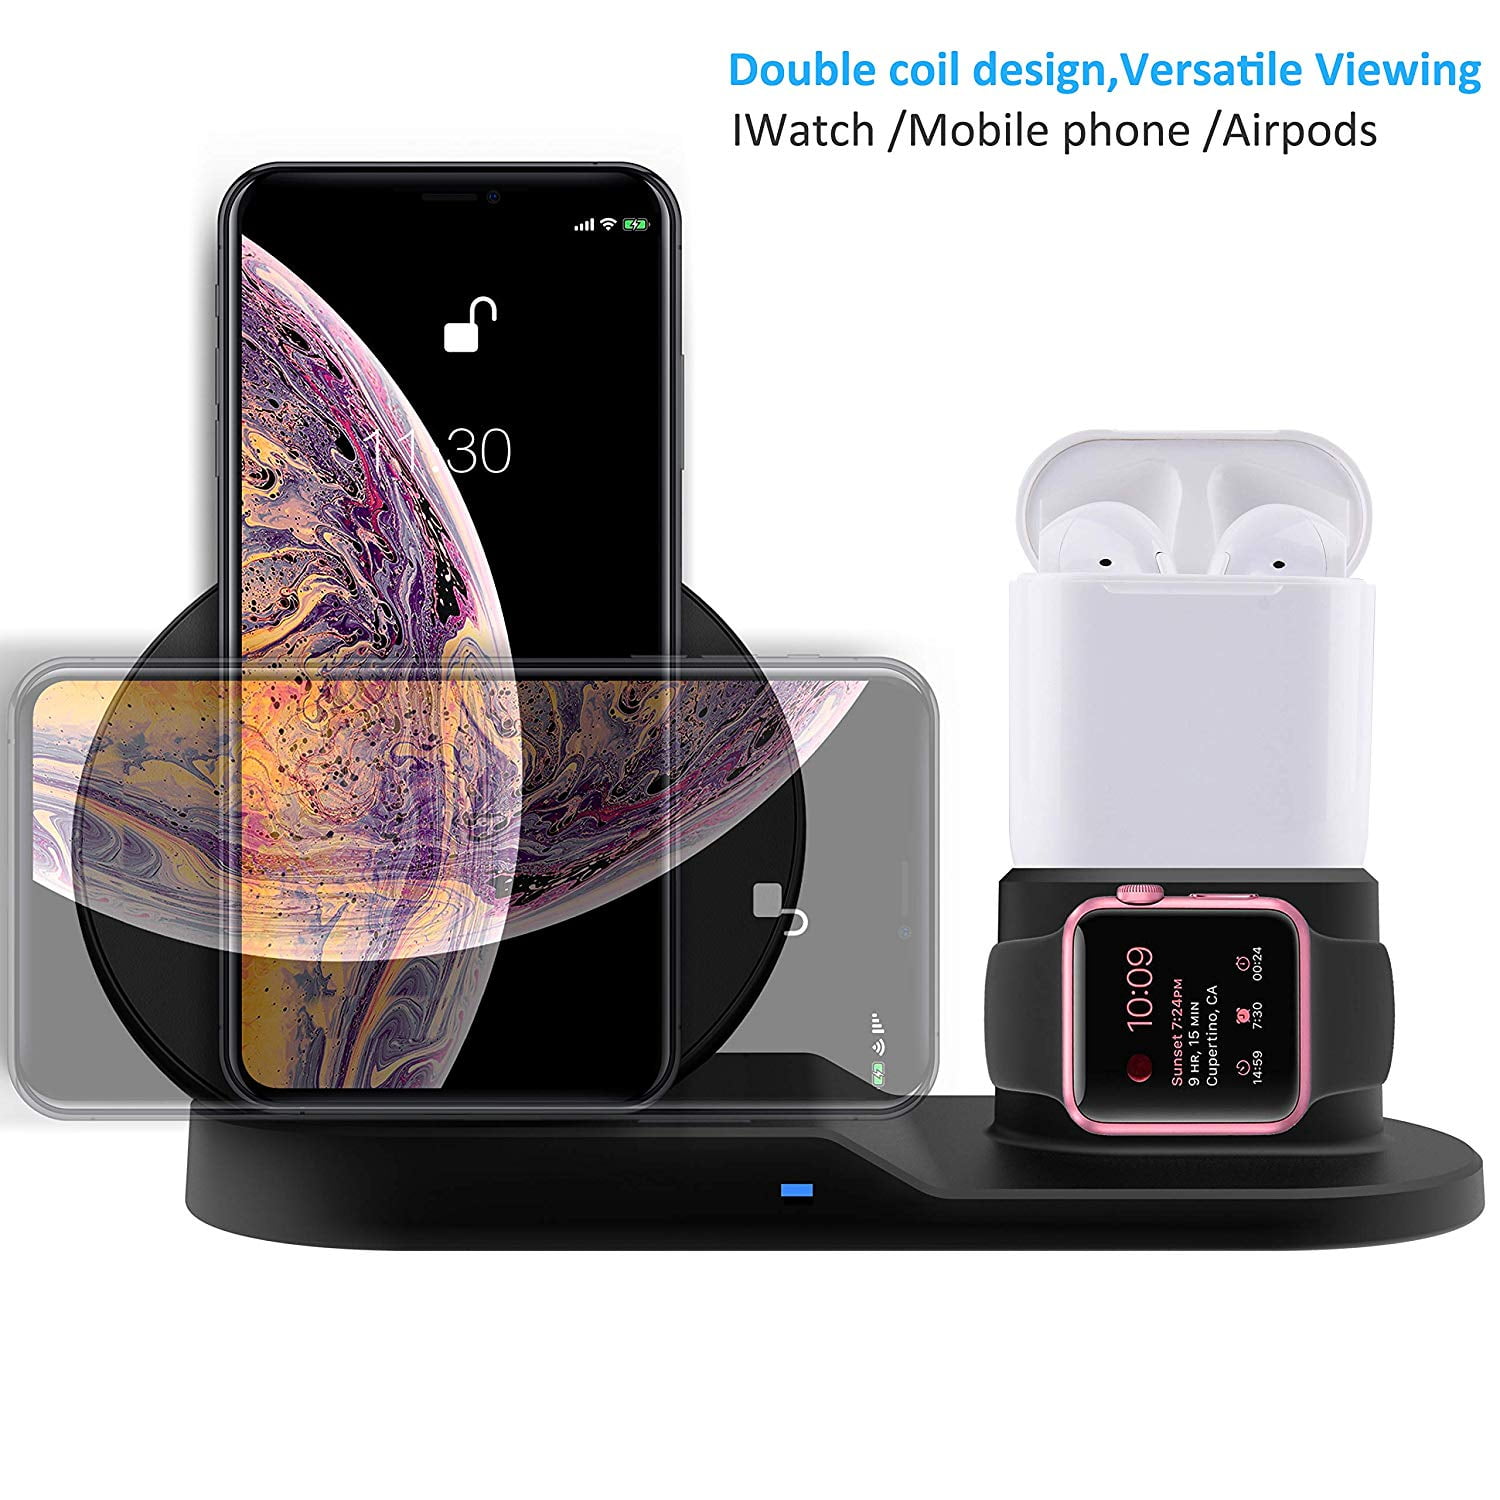 Velox Magnetic Wireless Duo Stand - Dual Wireless Charging